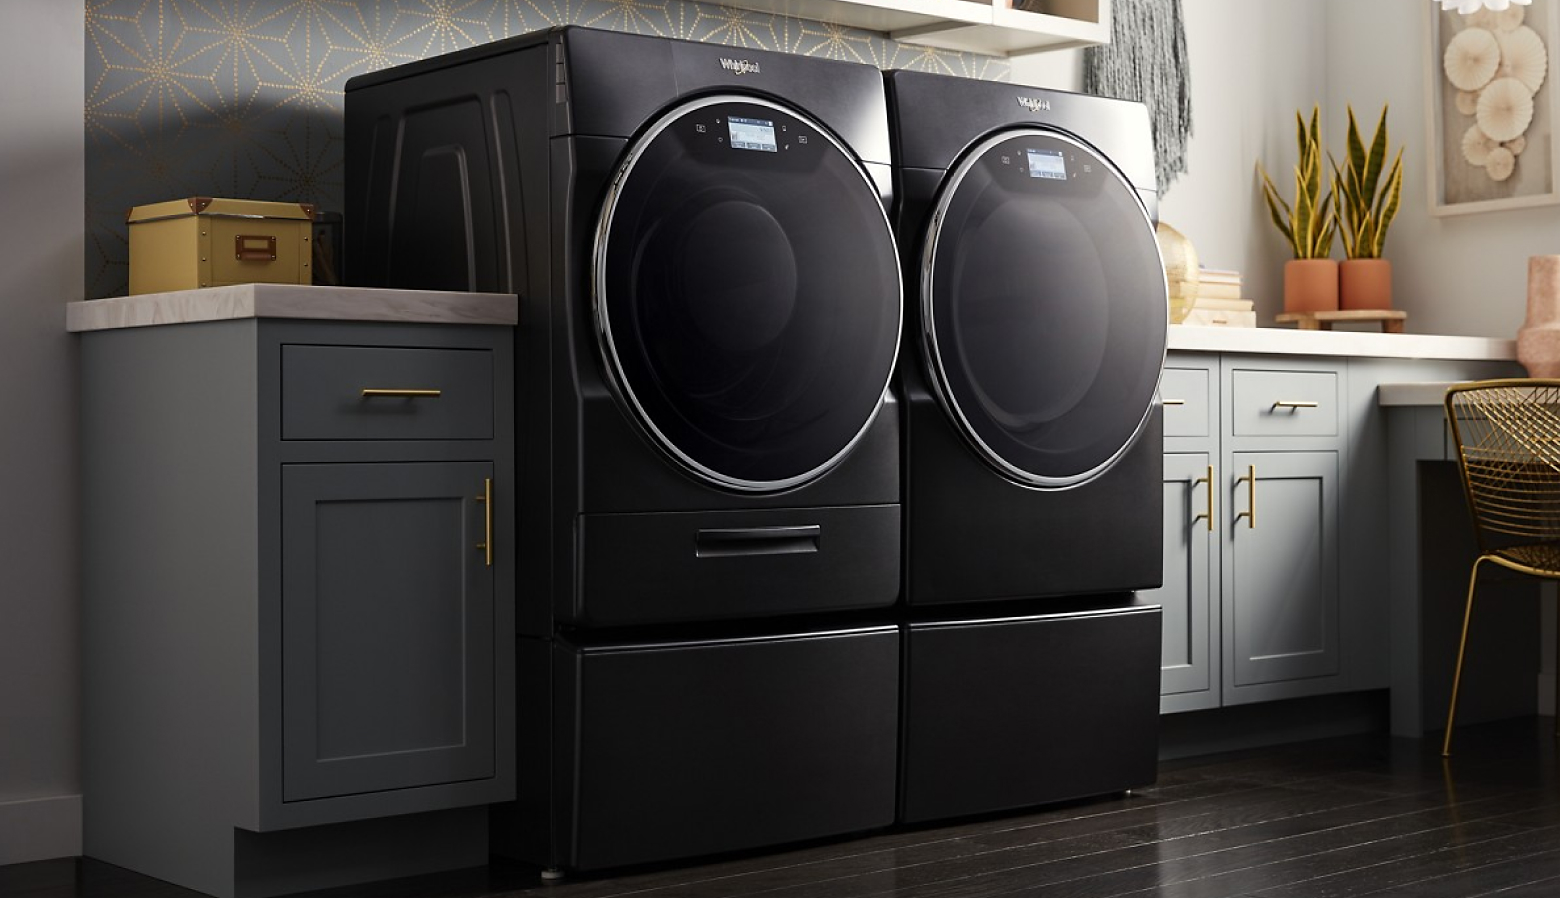 A front load washer and dryer in a modern laundry room